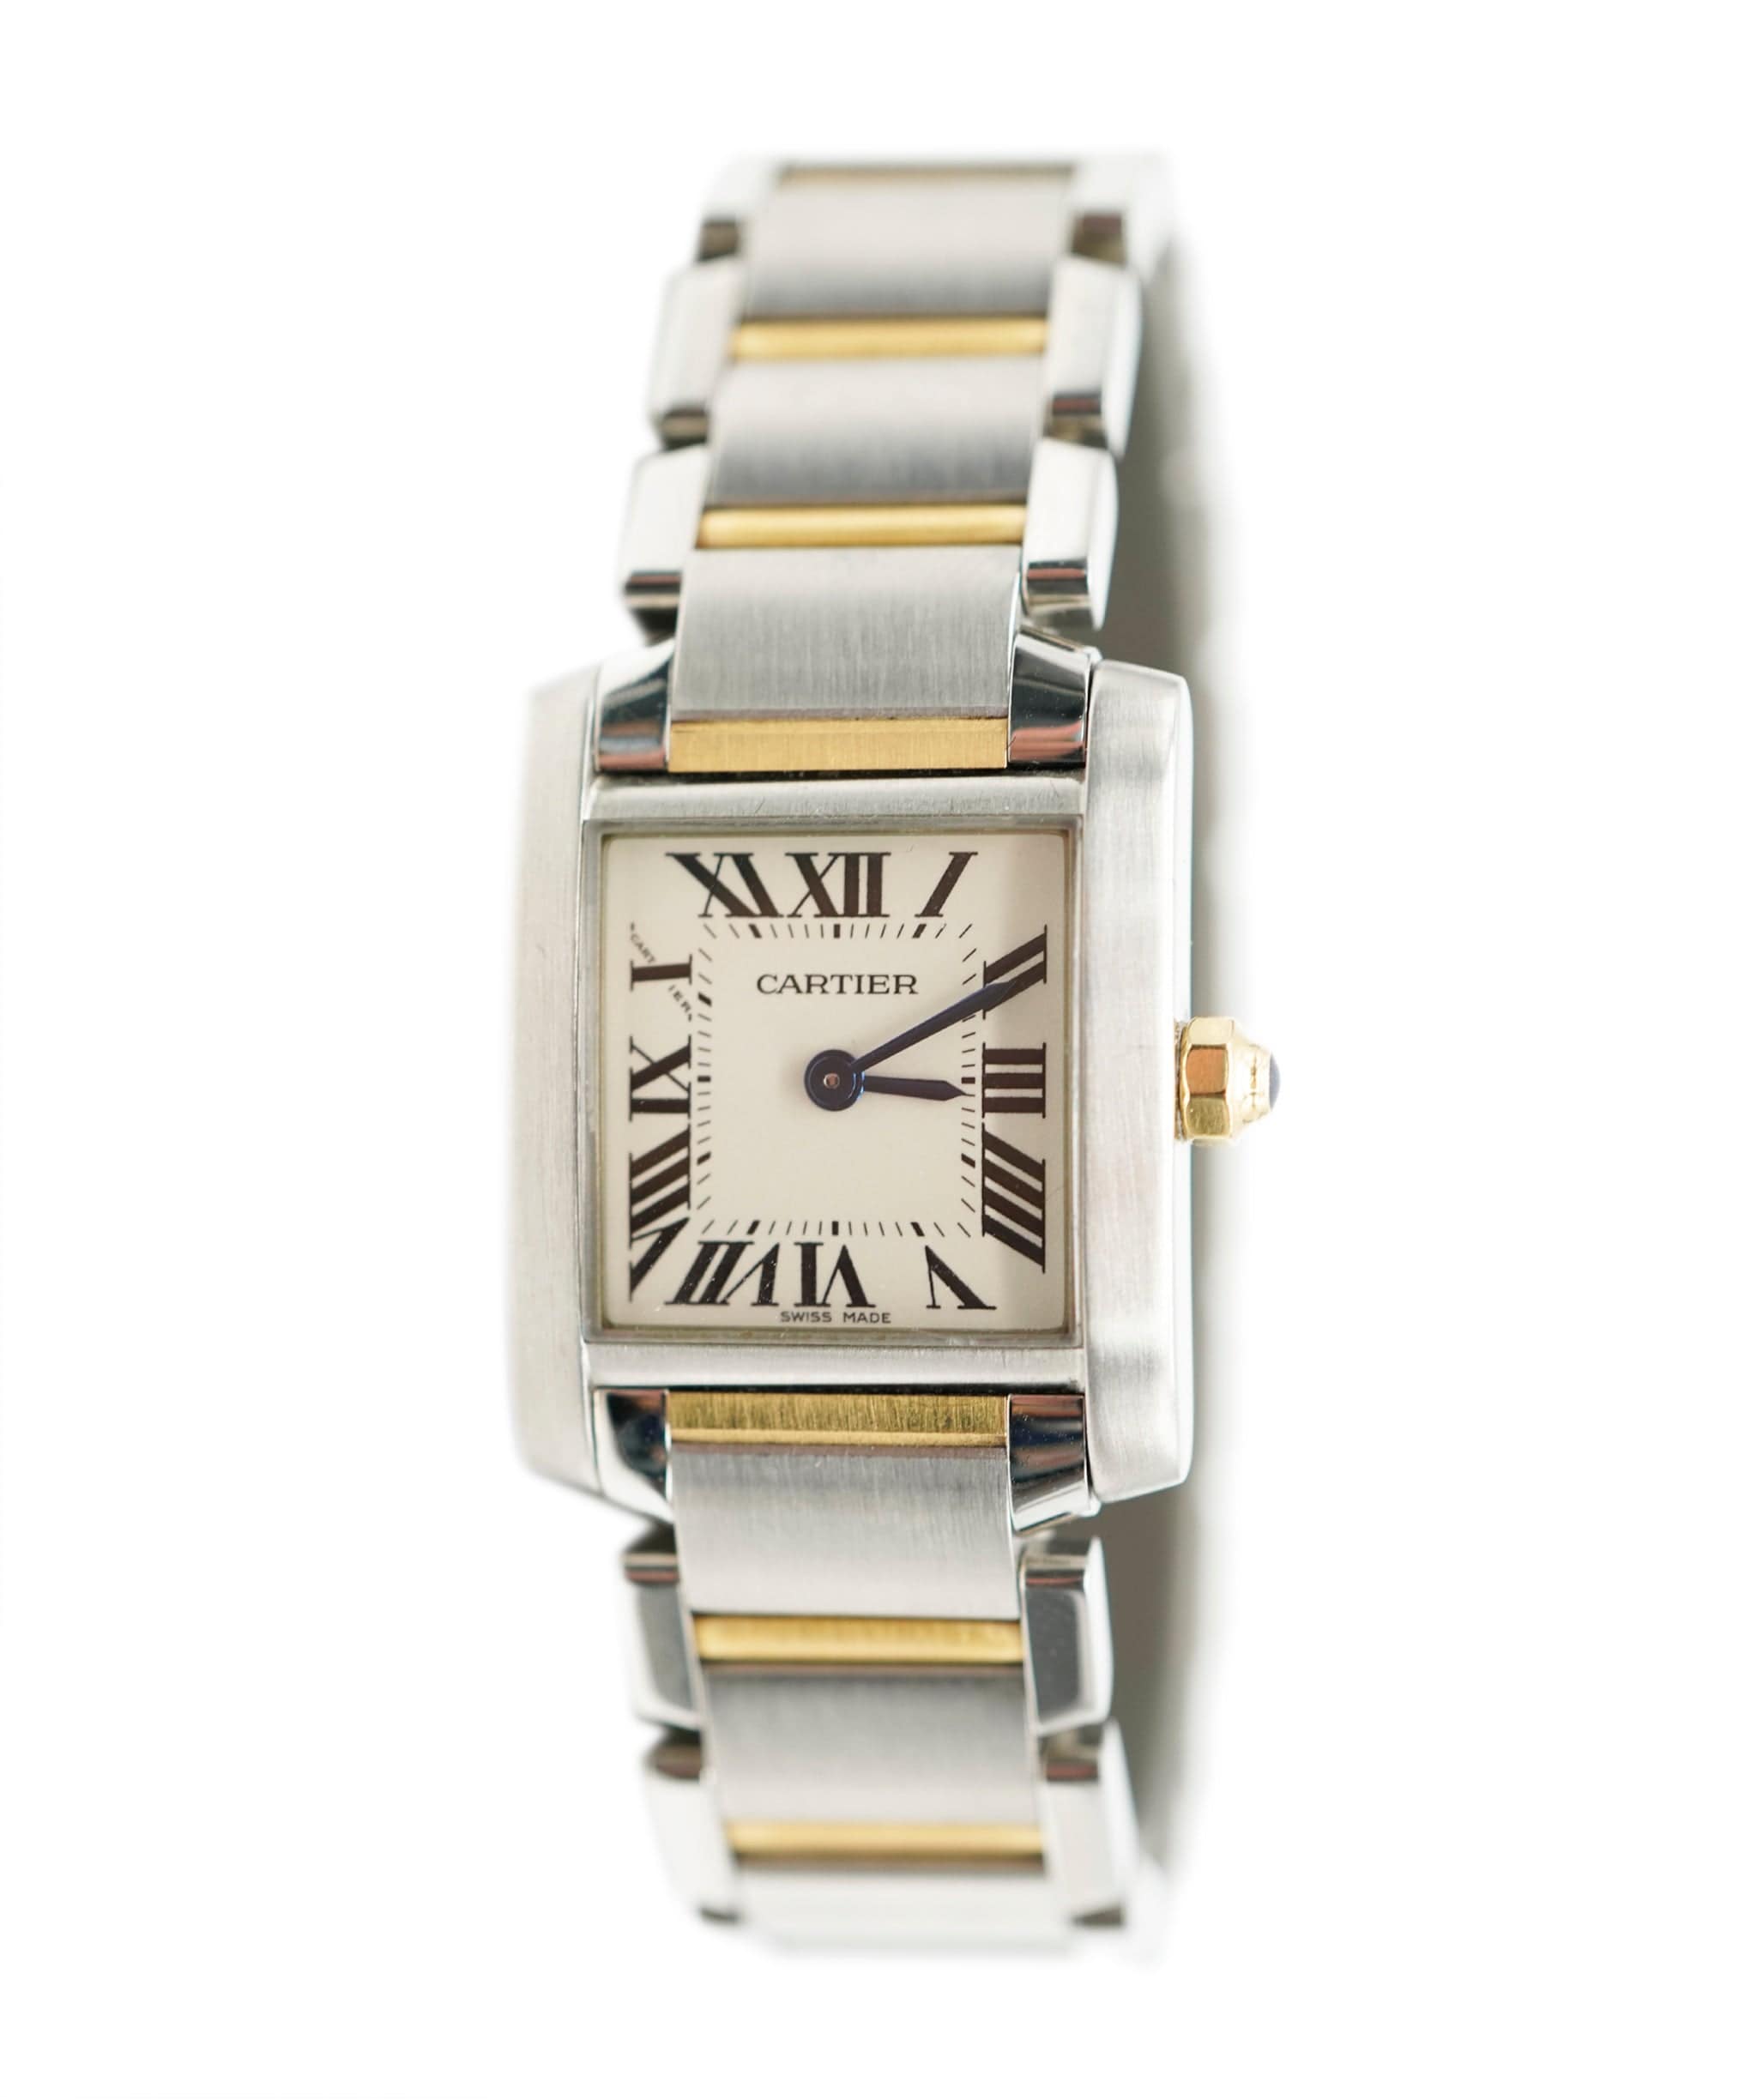 Cartier Cartier Tank Small Size Steel and Gold , sn: 4381658x         AGC1563